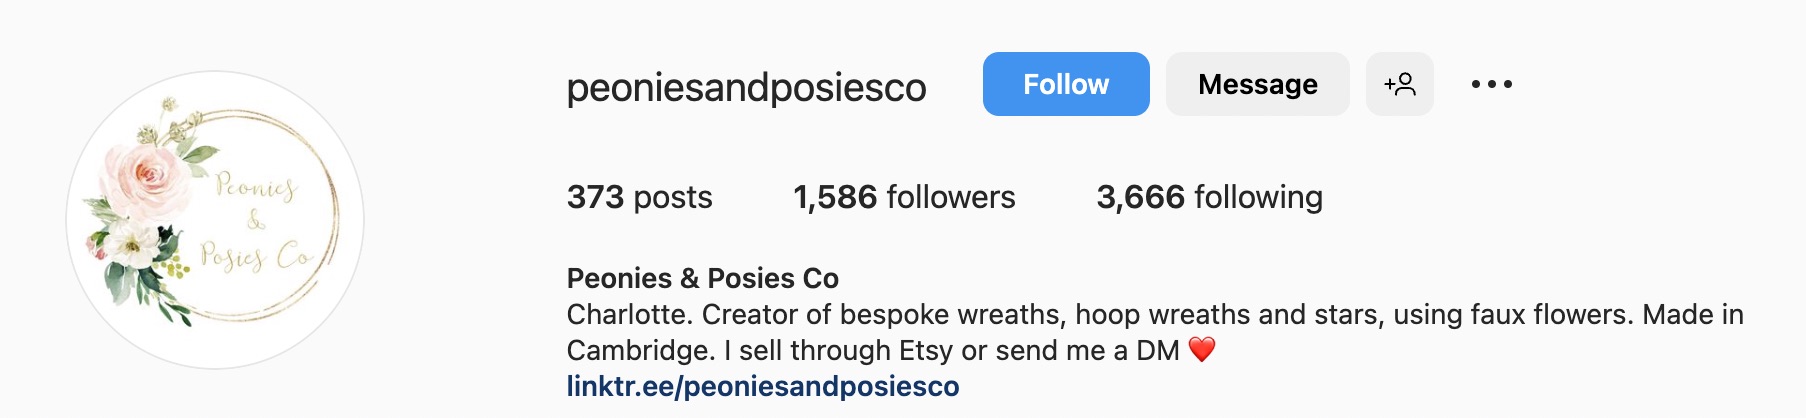 Creative Instagram bio ideas for Etsy shops, peonies and posies